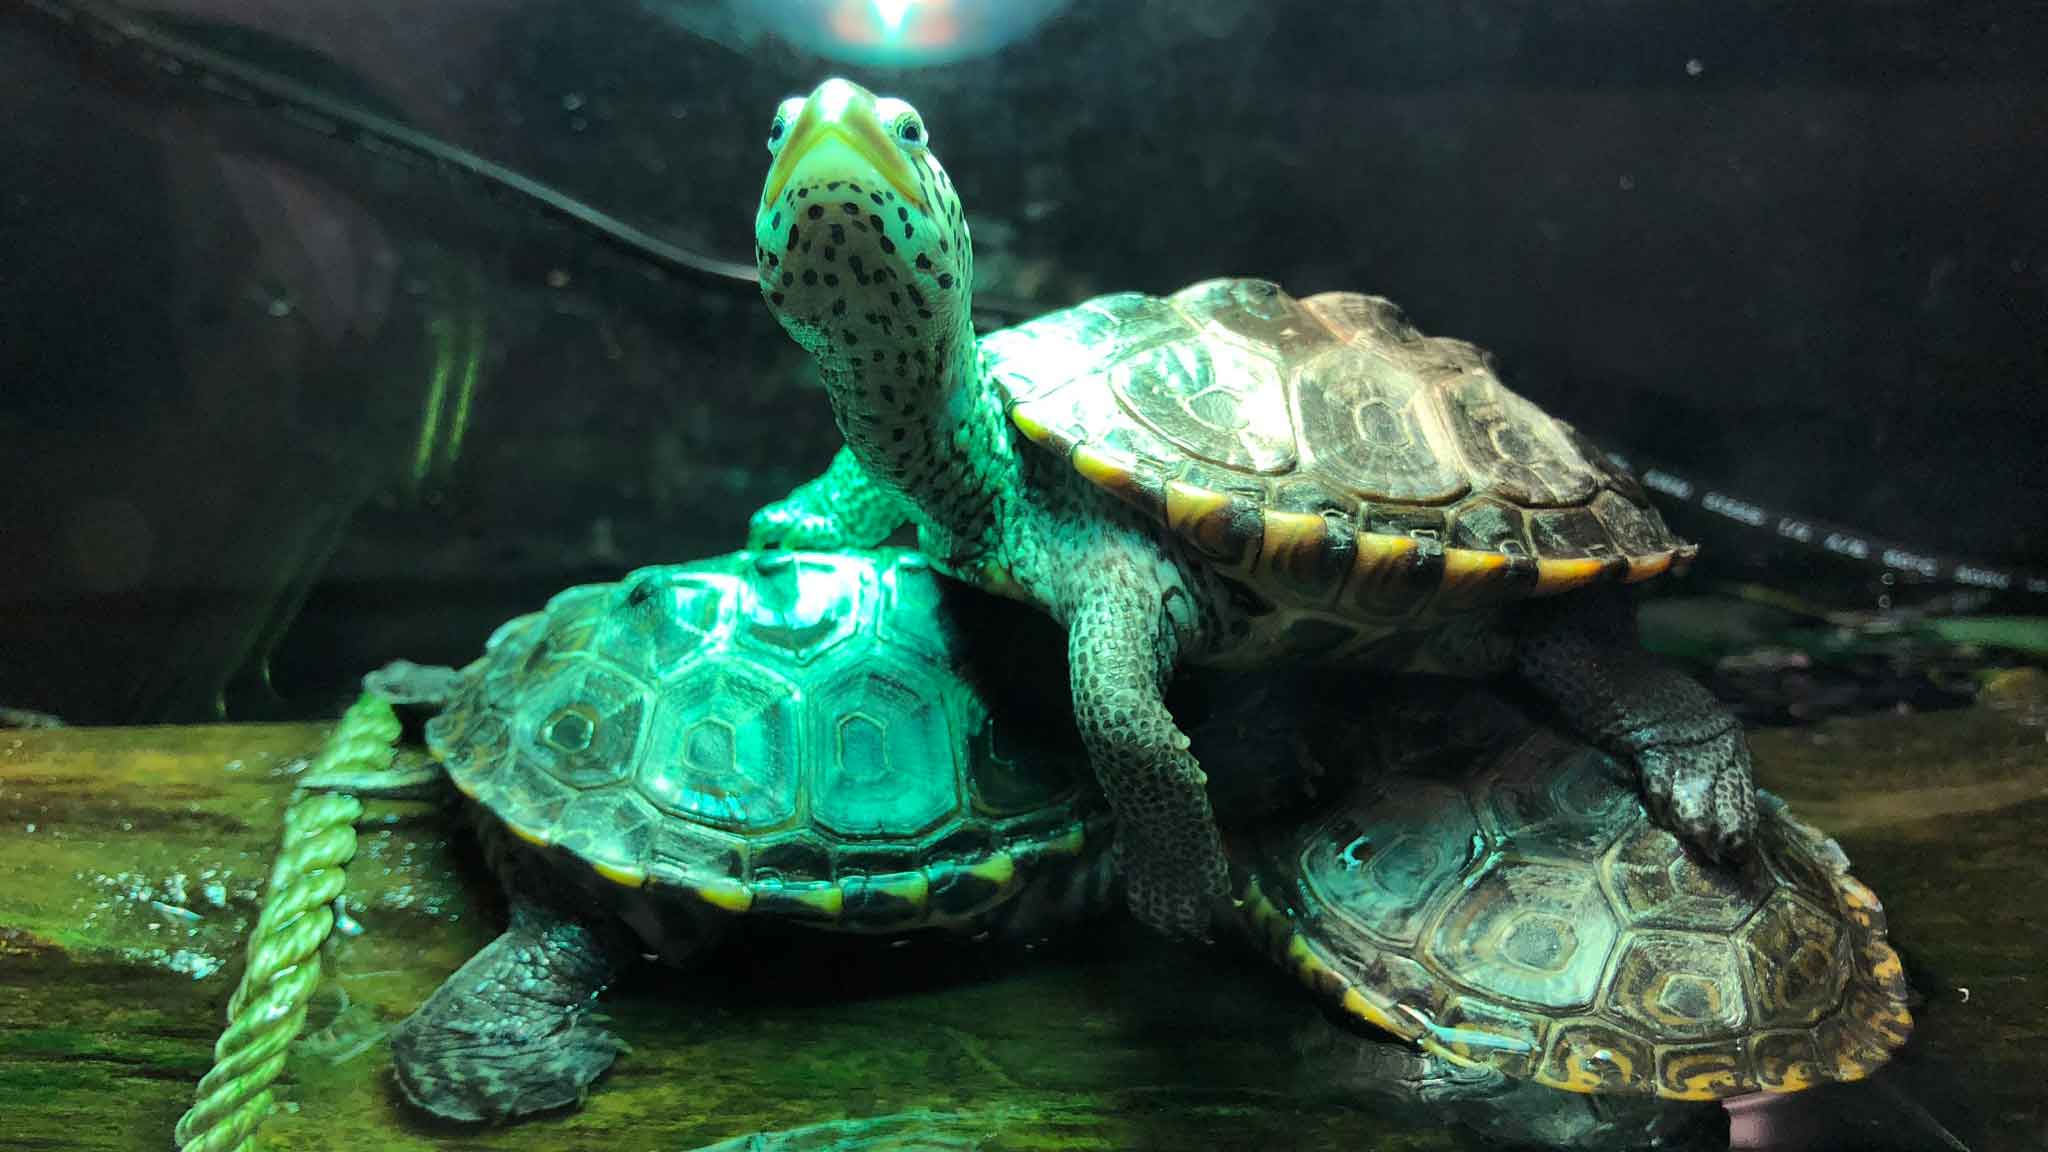 A diamondback terrapin, or turtle smiles at the camera as it sits on two others